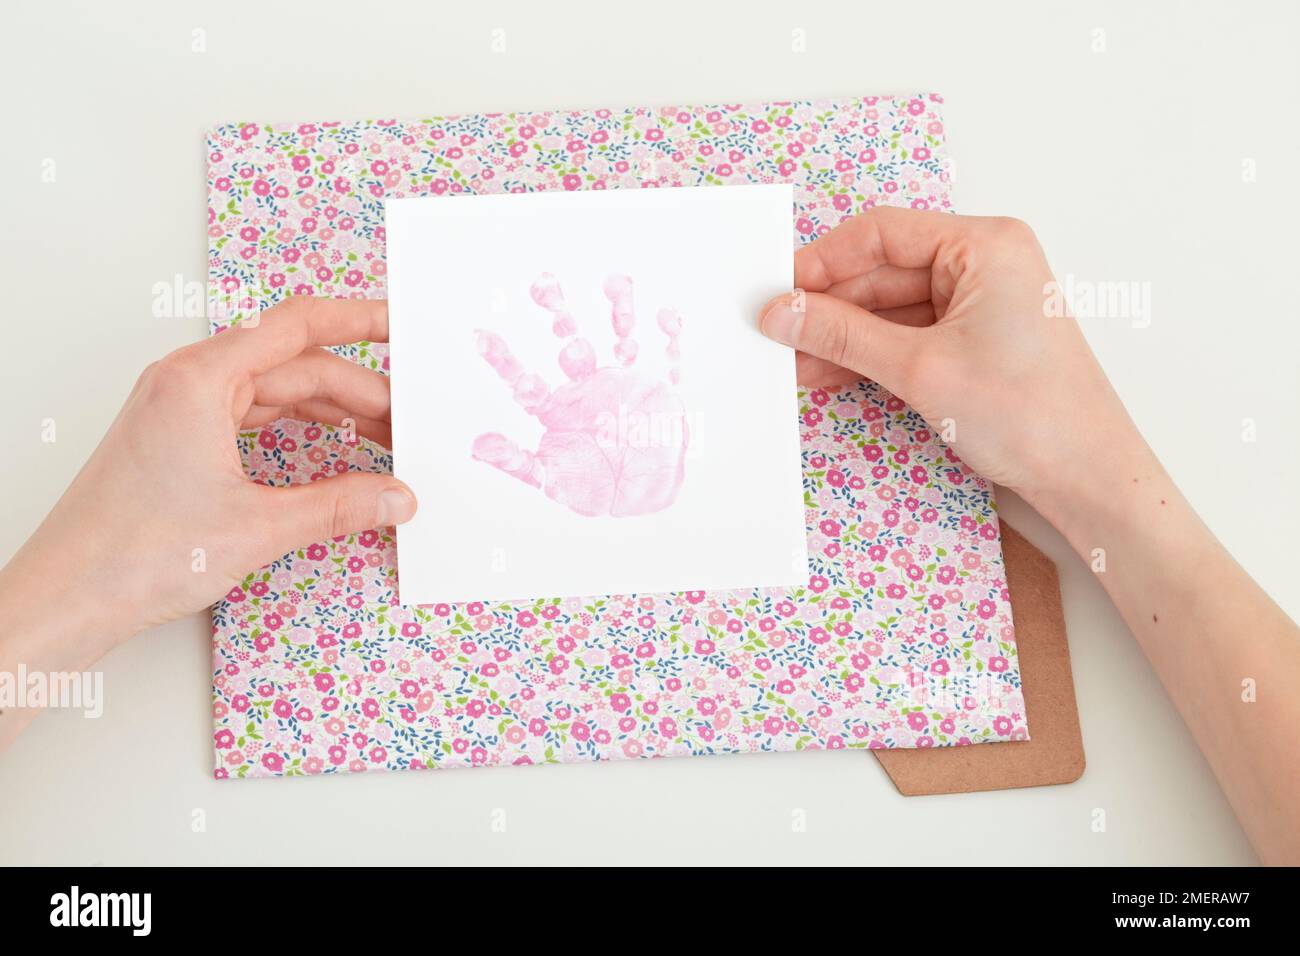 Placing hand print on square pattern fabric Stock Photo